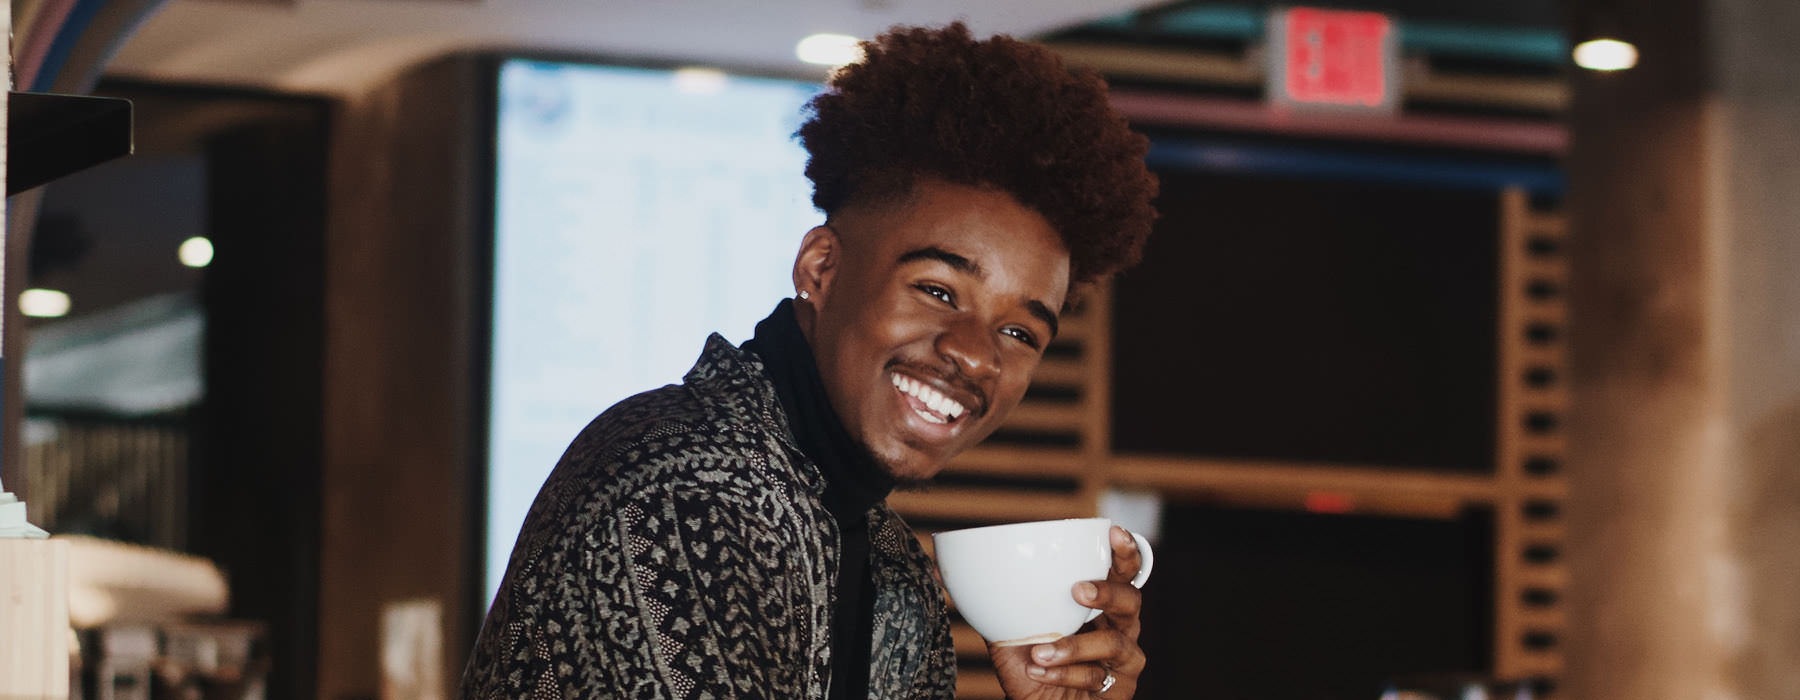 young man smiles at the camera as he holds a cup of coffee in local cafe